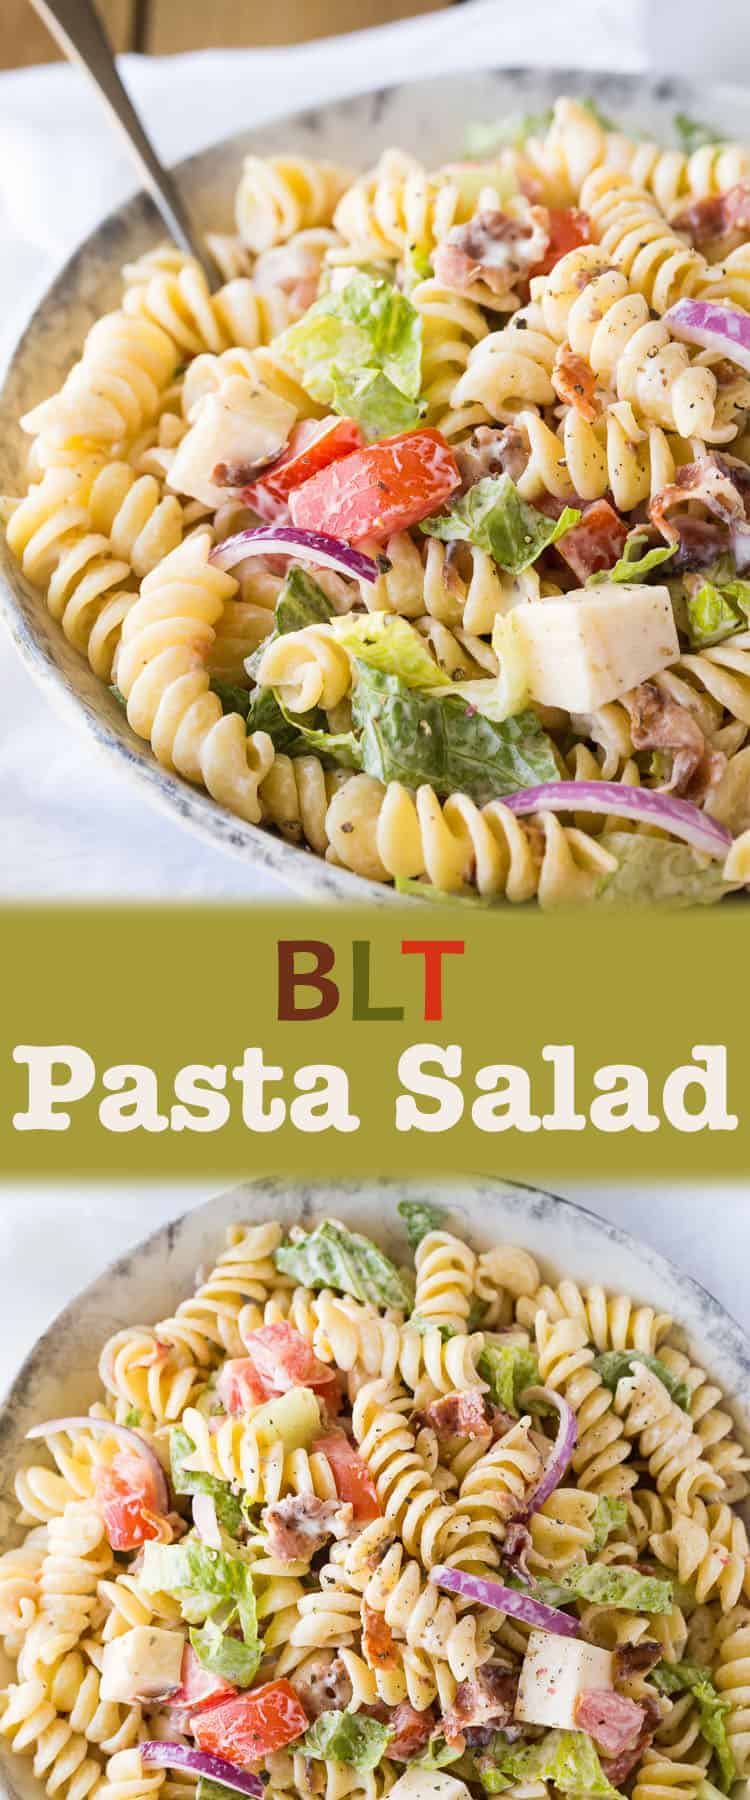 A dish is filled with food, with Salad and Pasta